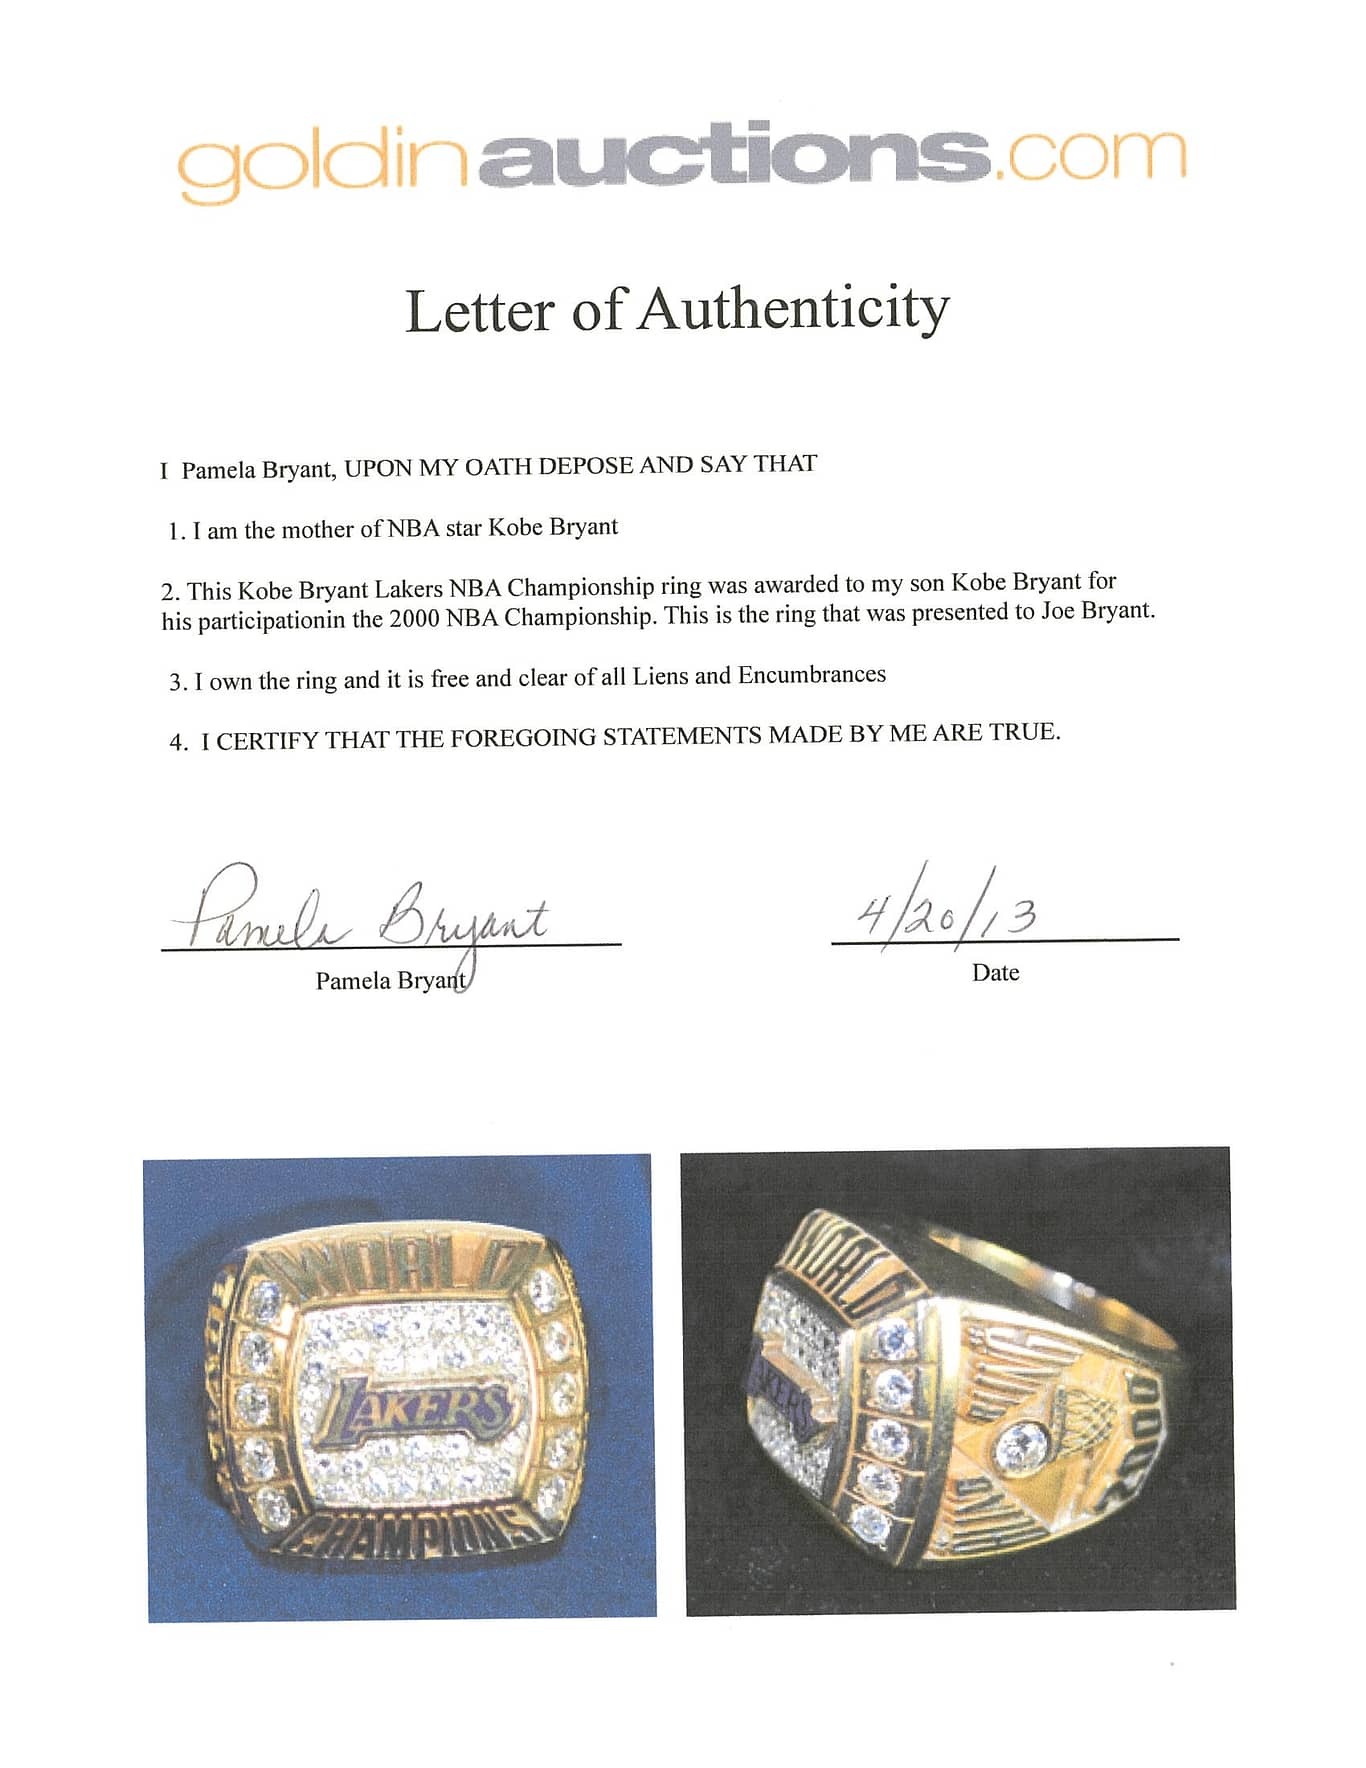 Kobe Bryant 2000 NBA Championship Ring Can be Yours For a Few Thousand Bucks!!! - THE SPORTS ROOM